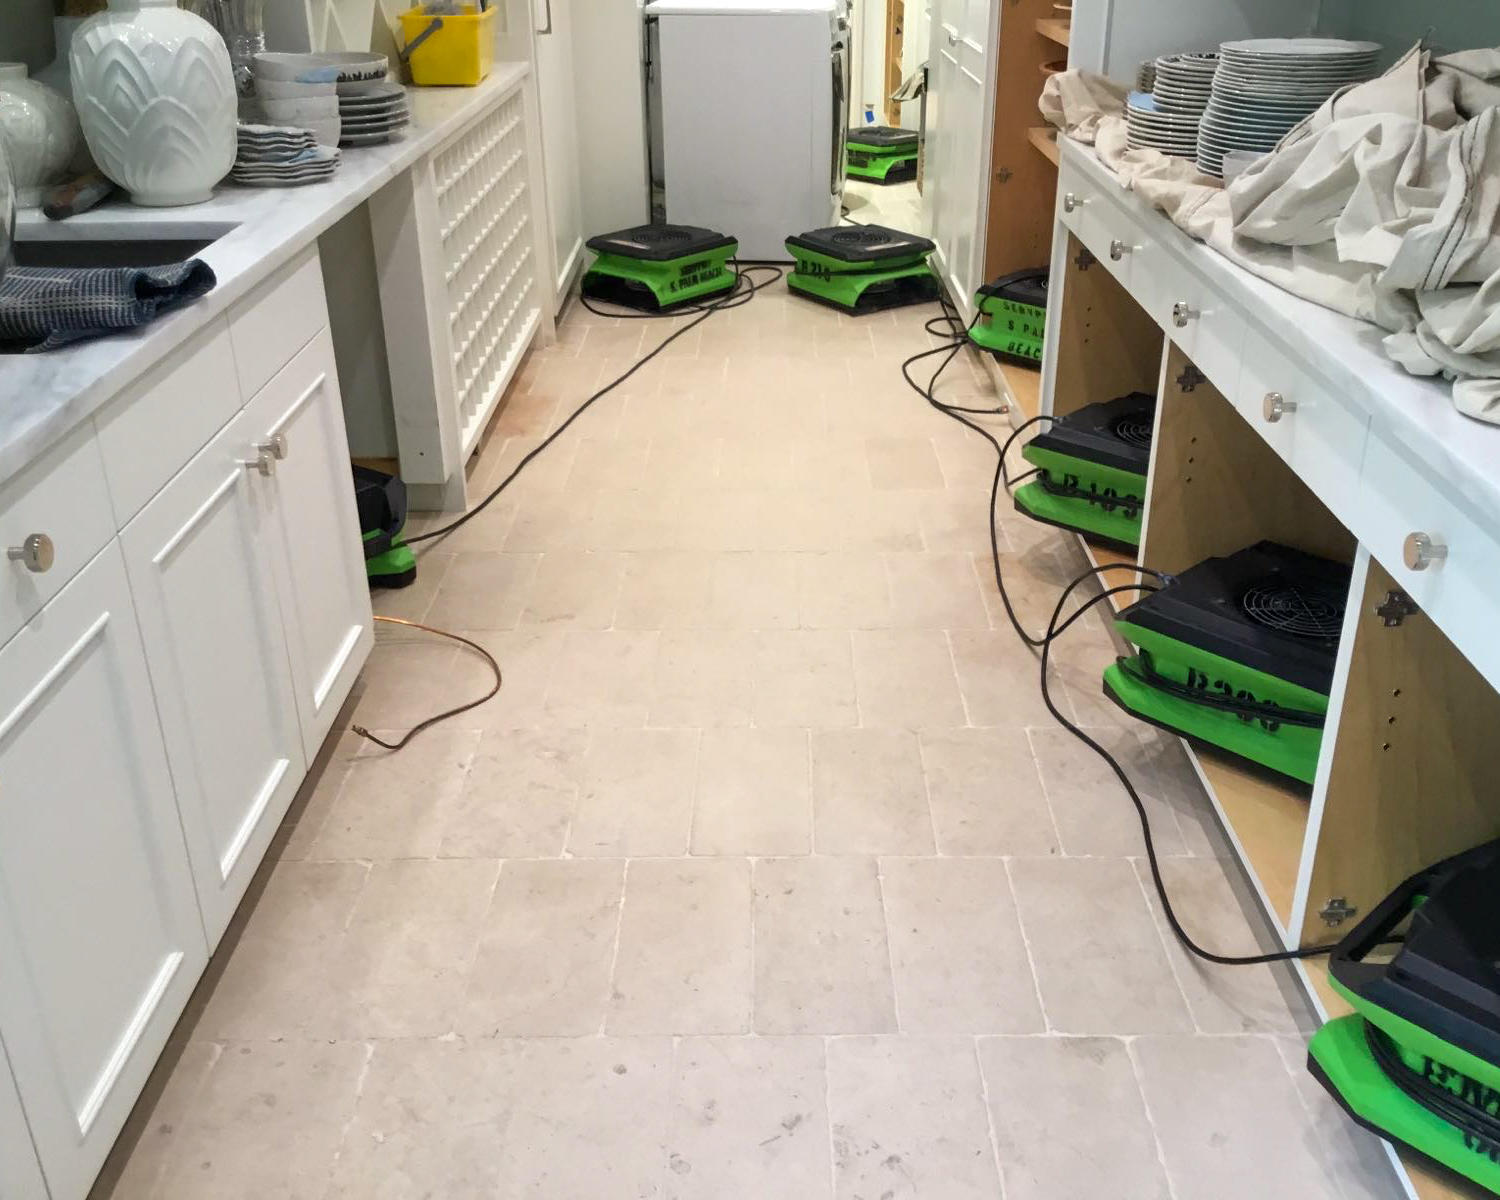 SERVPRO of Delray Beach understands how upsetting it can be when dealing with a water damage in your Delray Beach home or office.